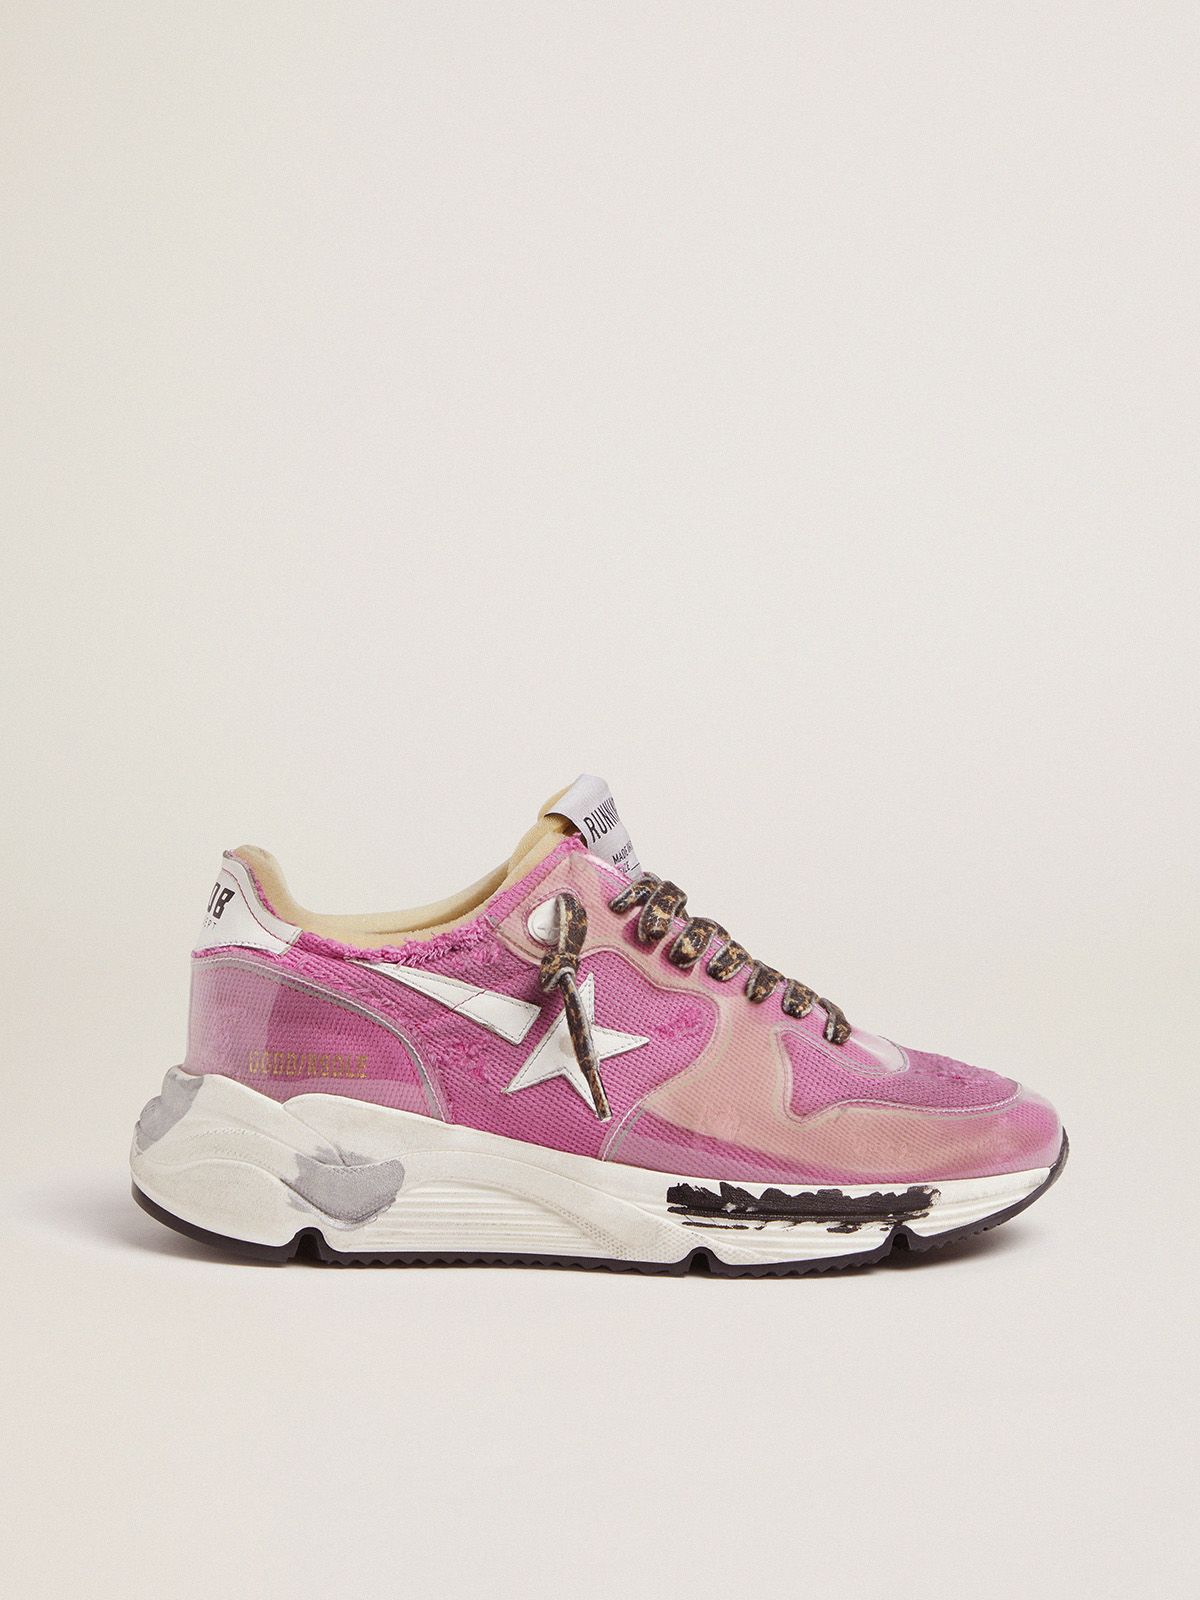 golden goose raw Fuchsia Sole LTD Running edges sneakers with